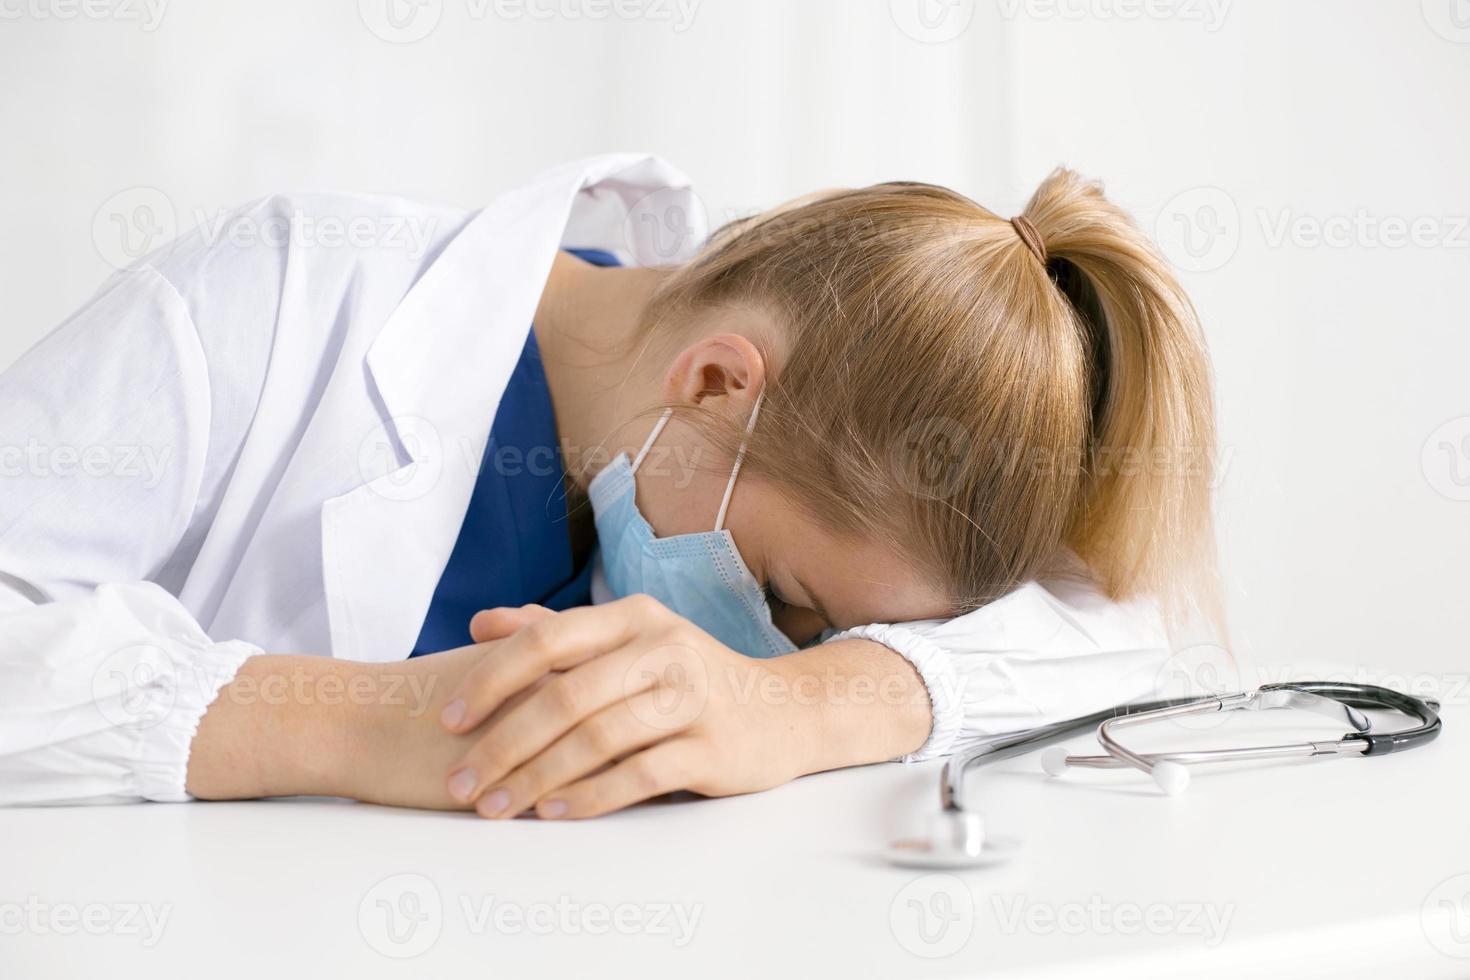 Tired and exhausted nurse or doctor. Stressed female medical worker with protective face mask, depressed after working over hours due to coronavirus outbreak. Covid 19. Medicine, healthcare, pandemic photo